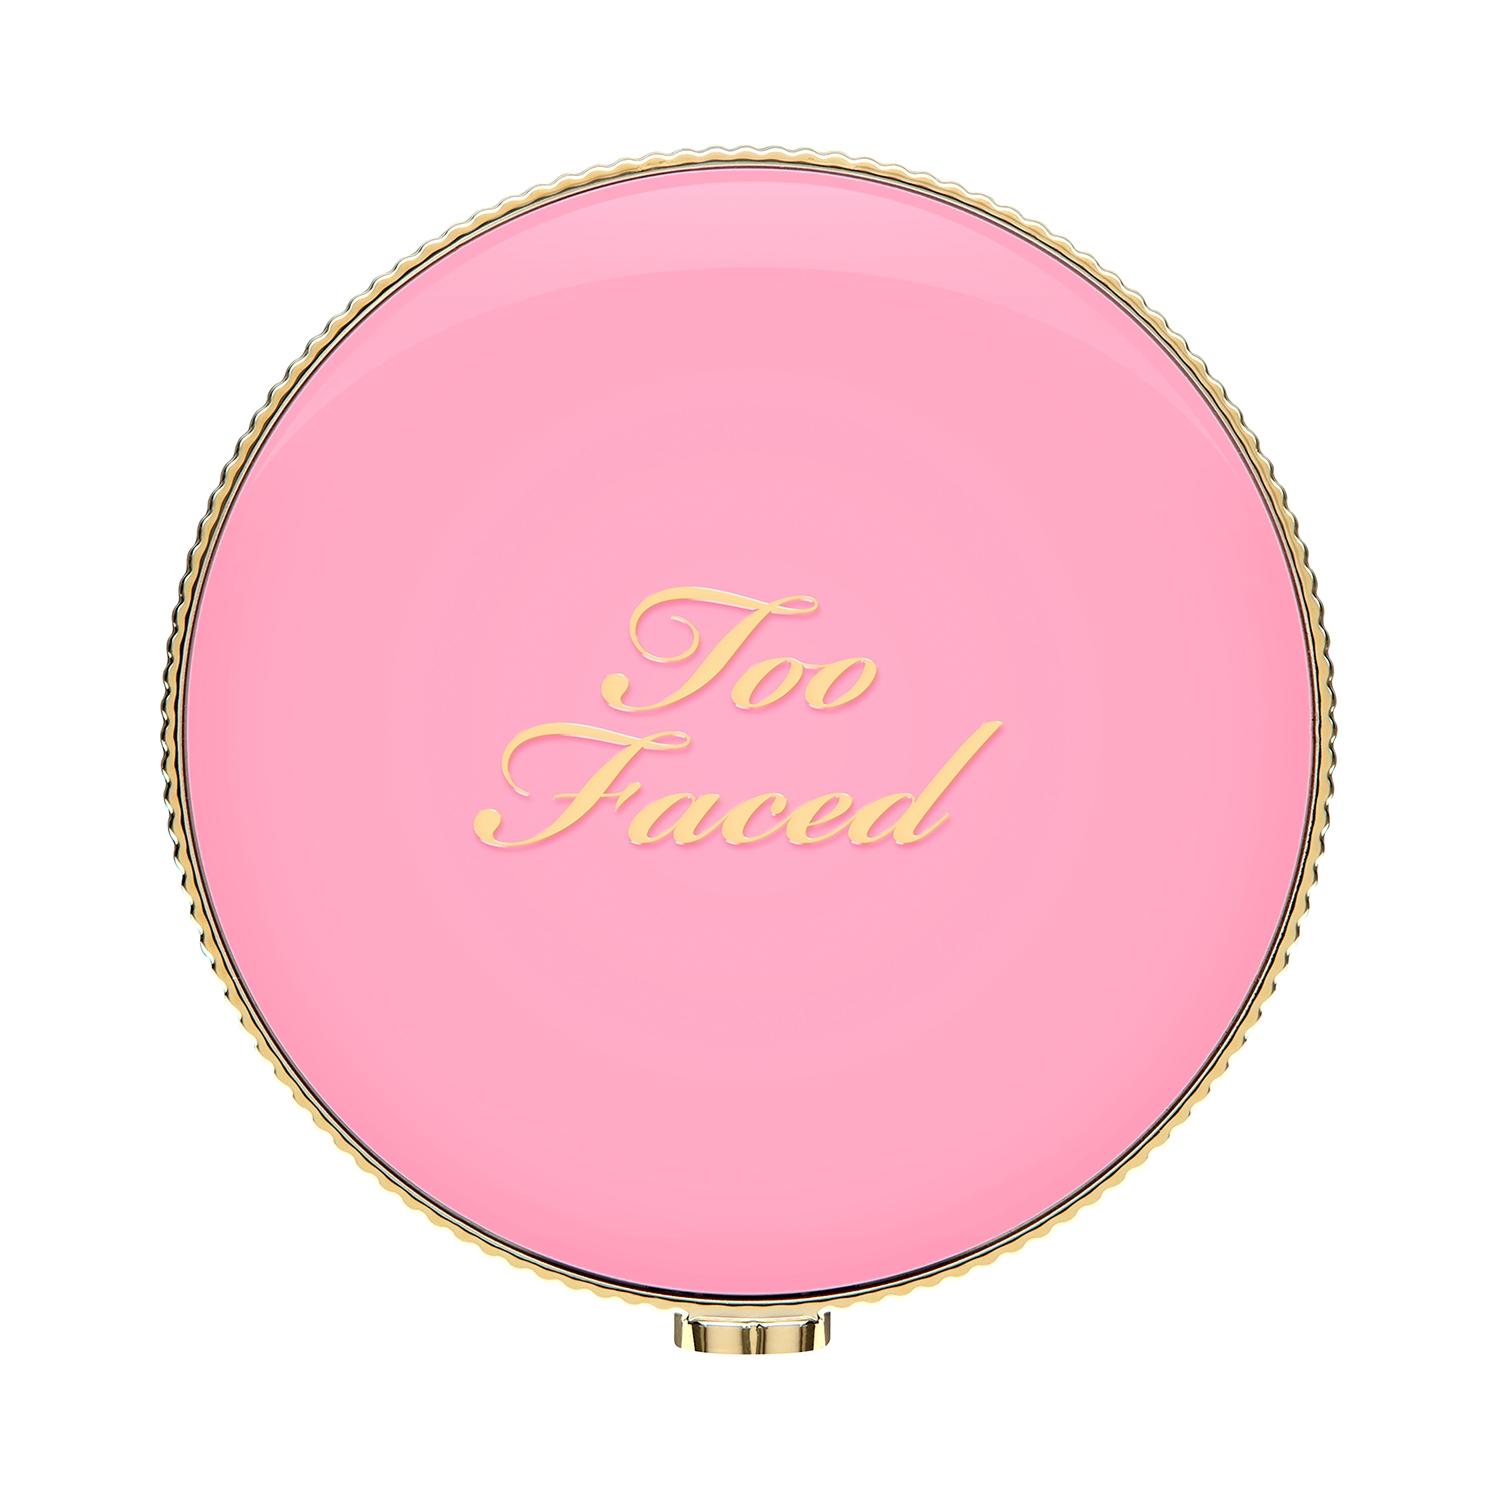 too faced cloud crush blush - candy clouds (4.8g)